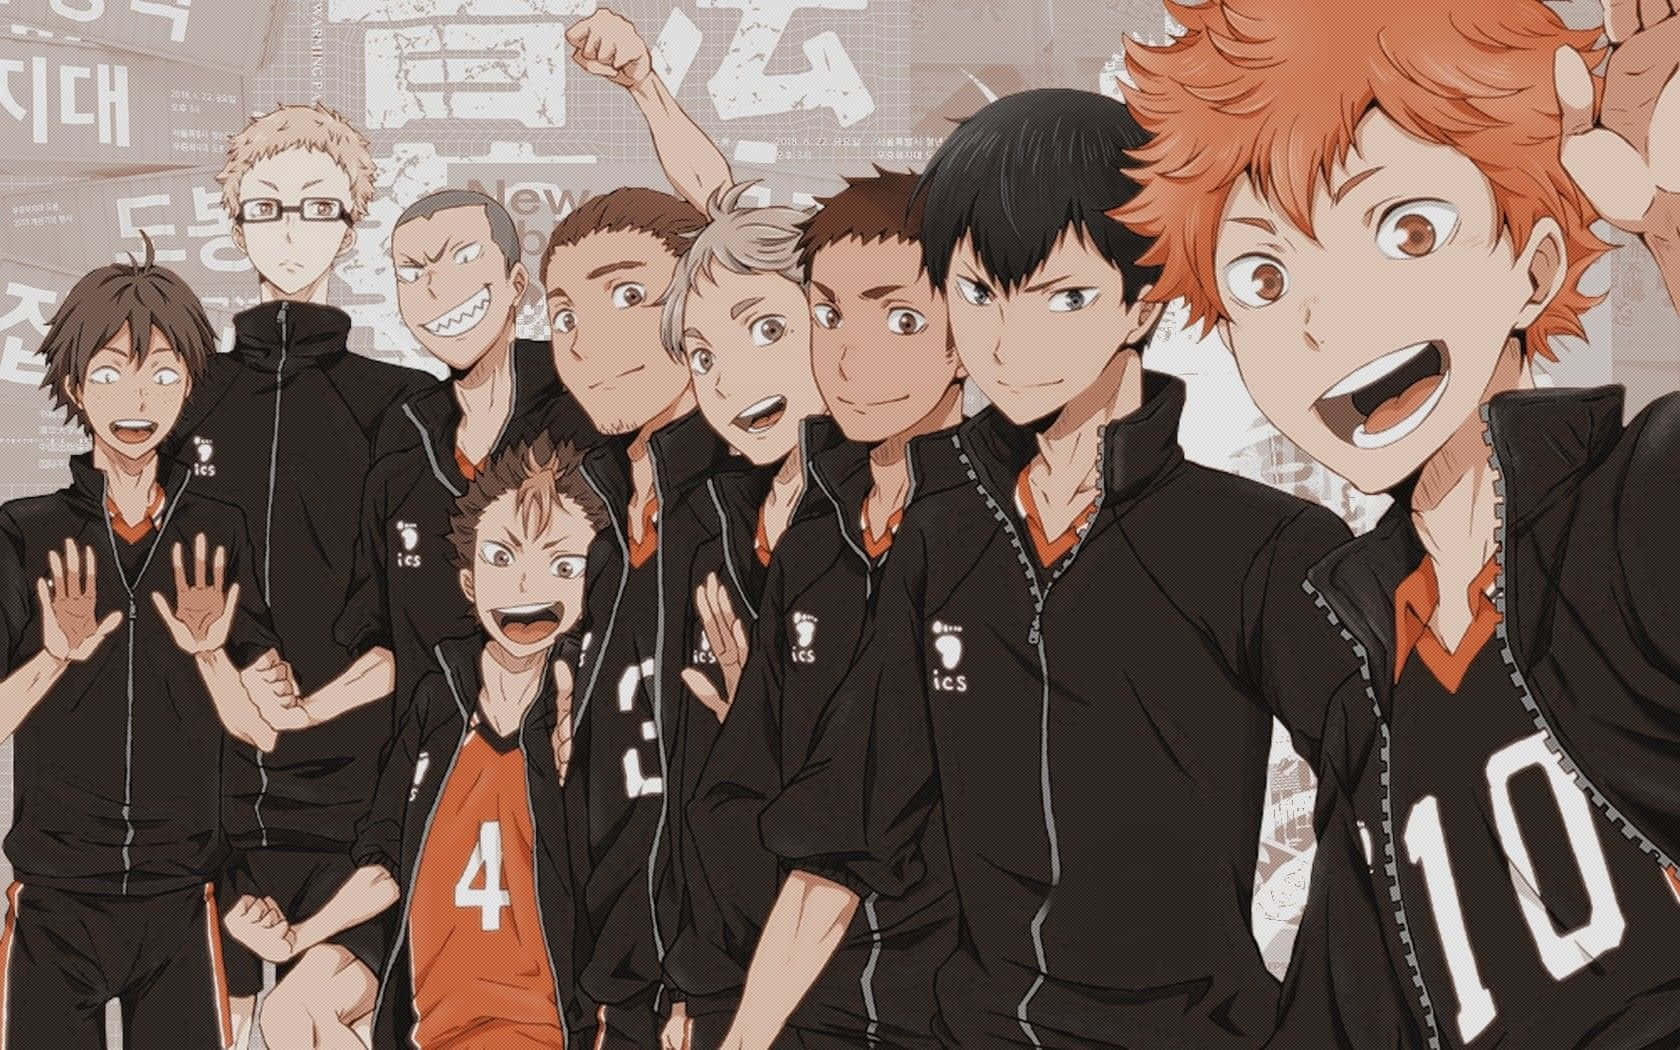 Get pumped up for match day with Haikyuu!!